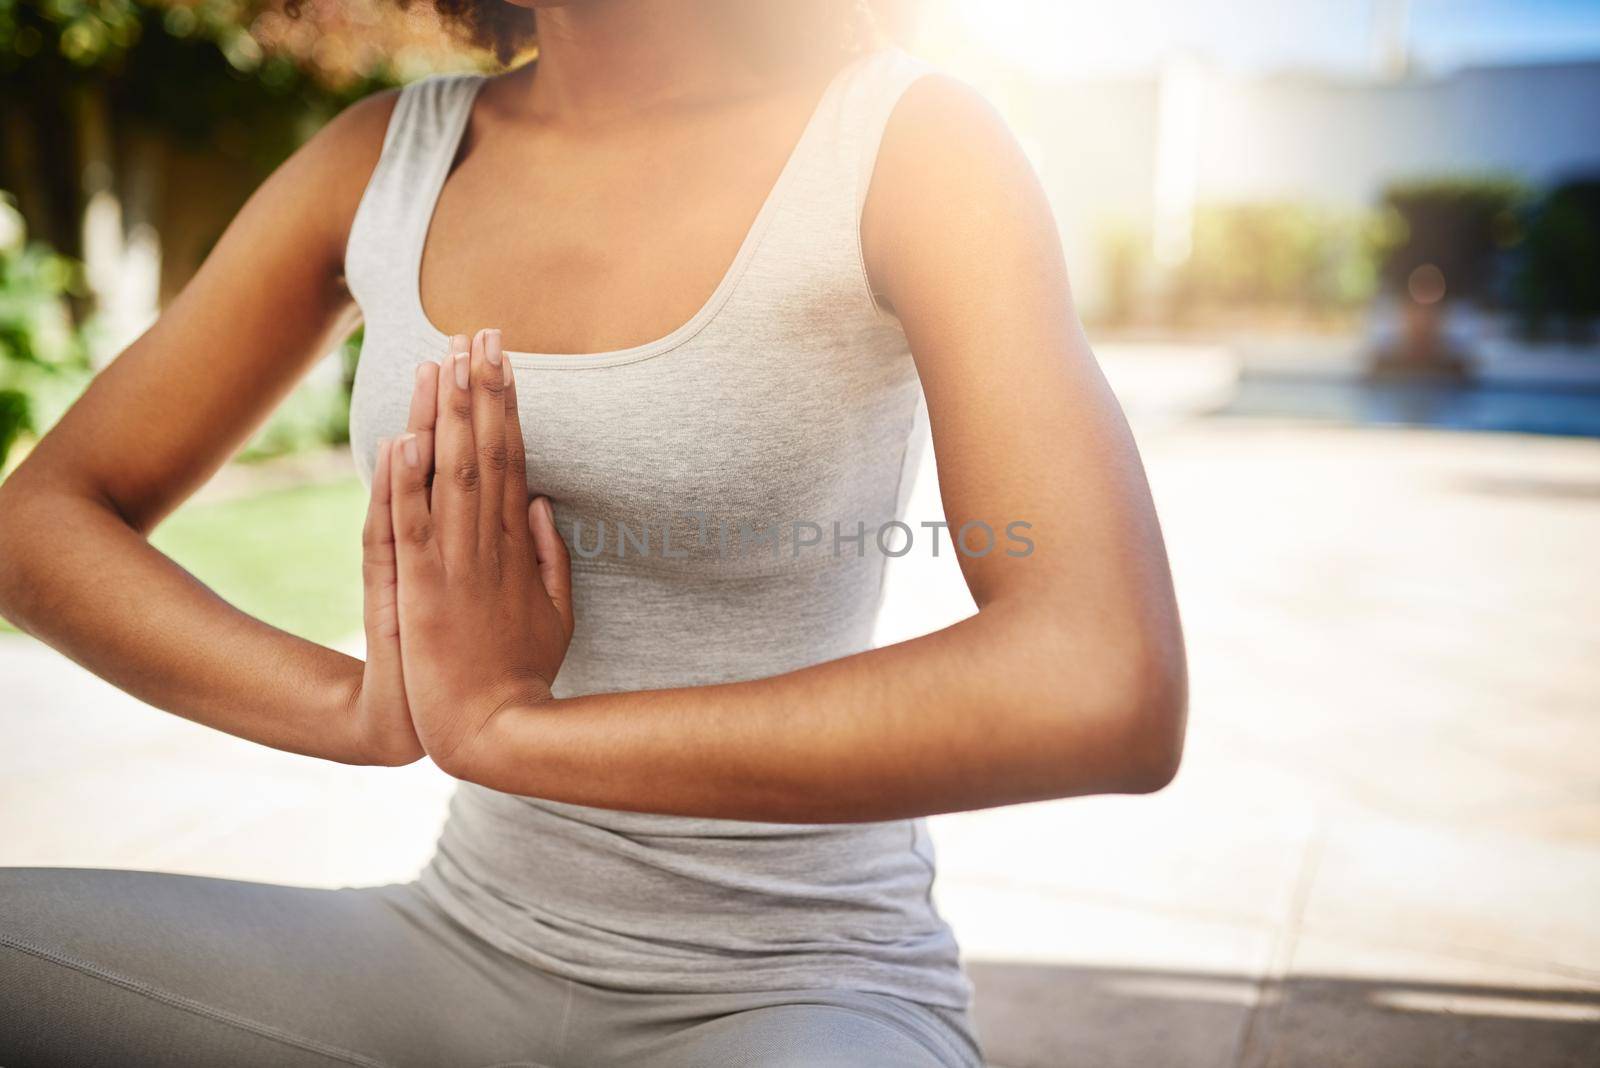 Keeping to her yoga routine. a sporty young woman practicing yoga outdoors